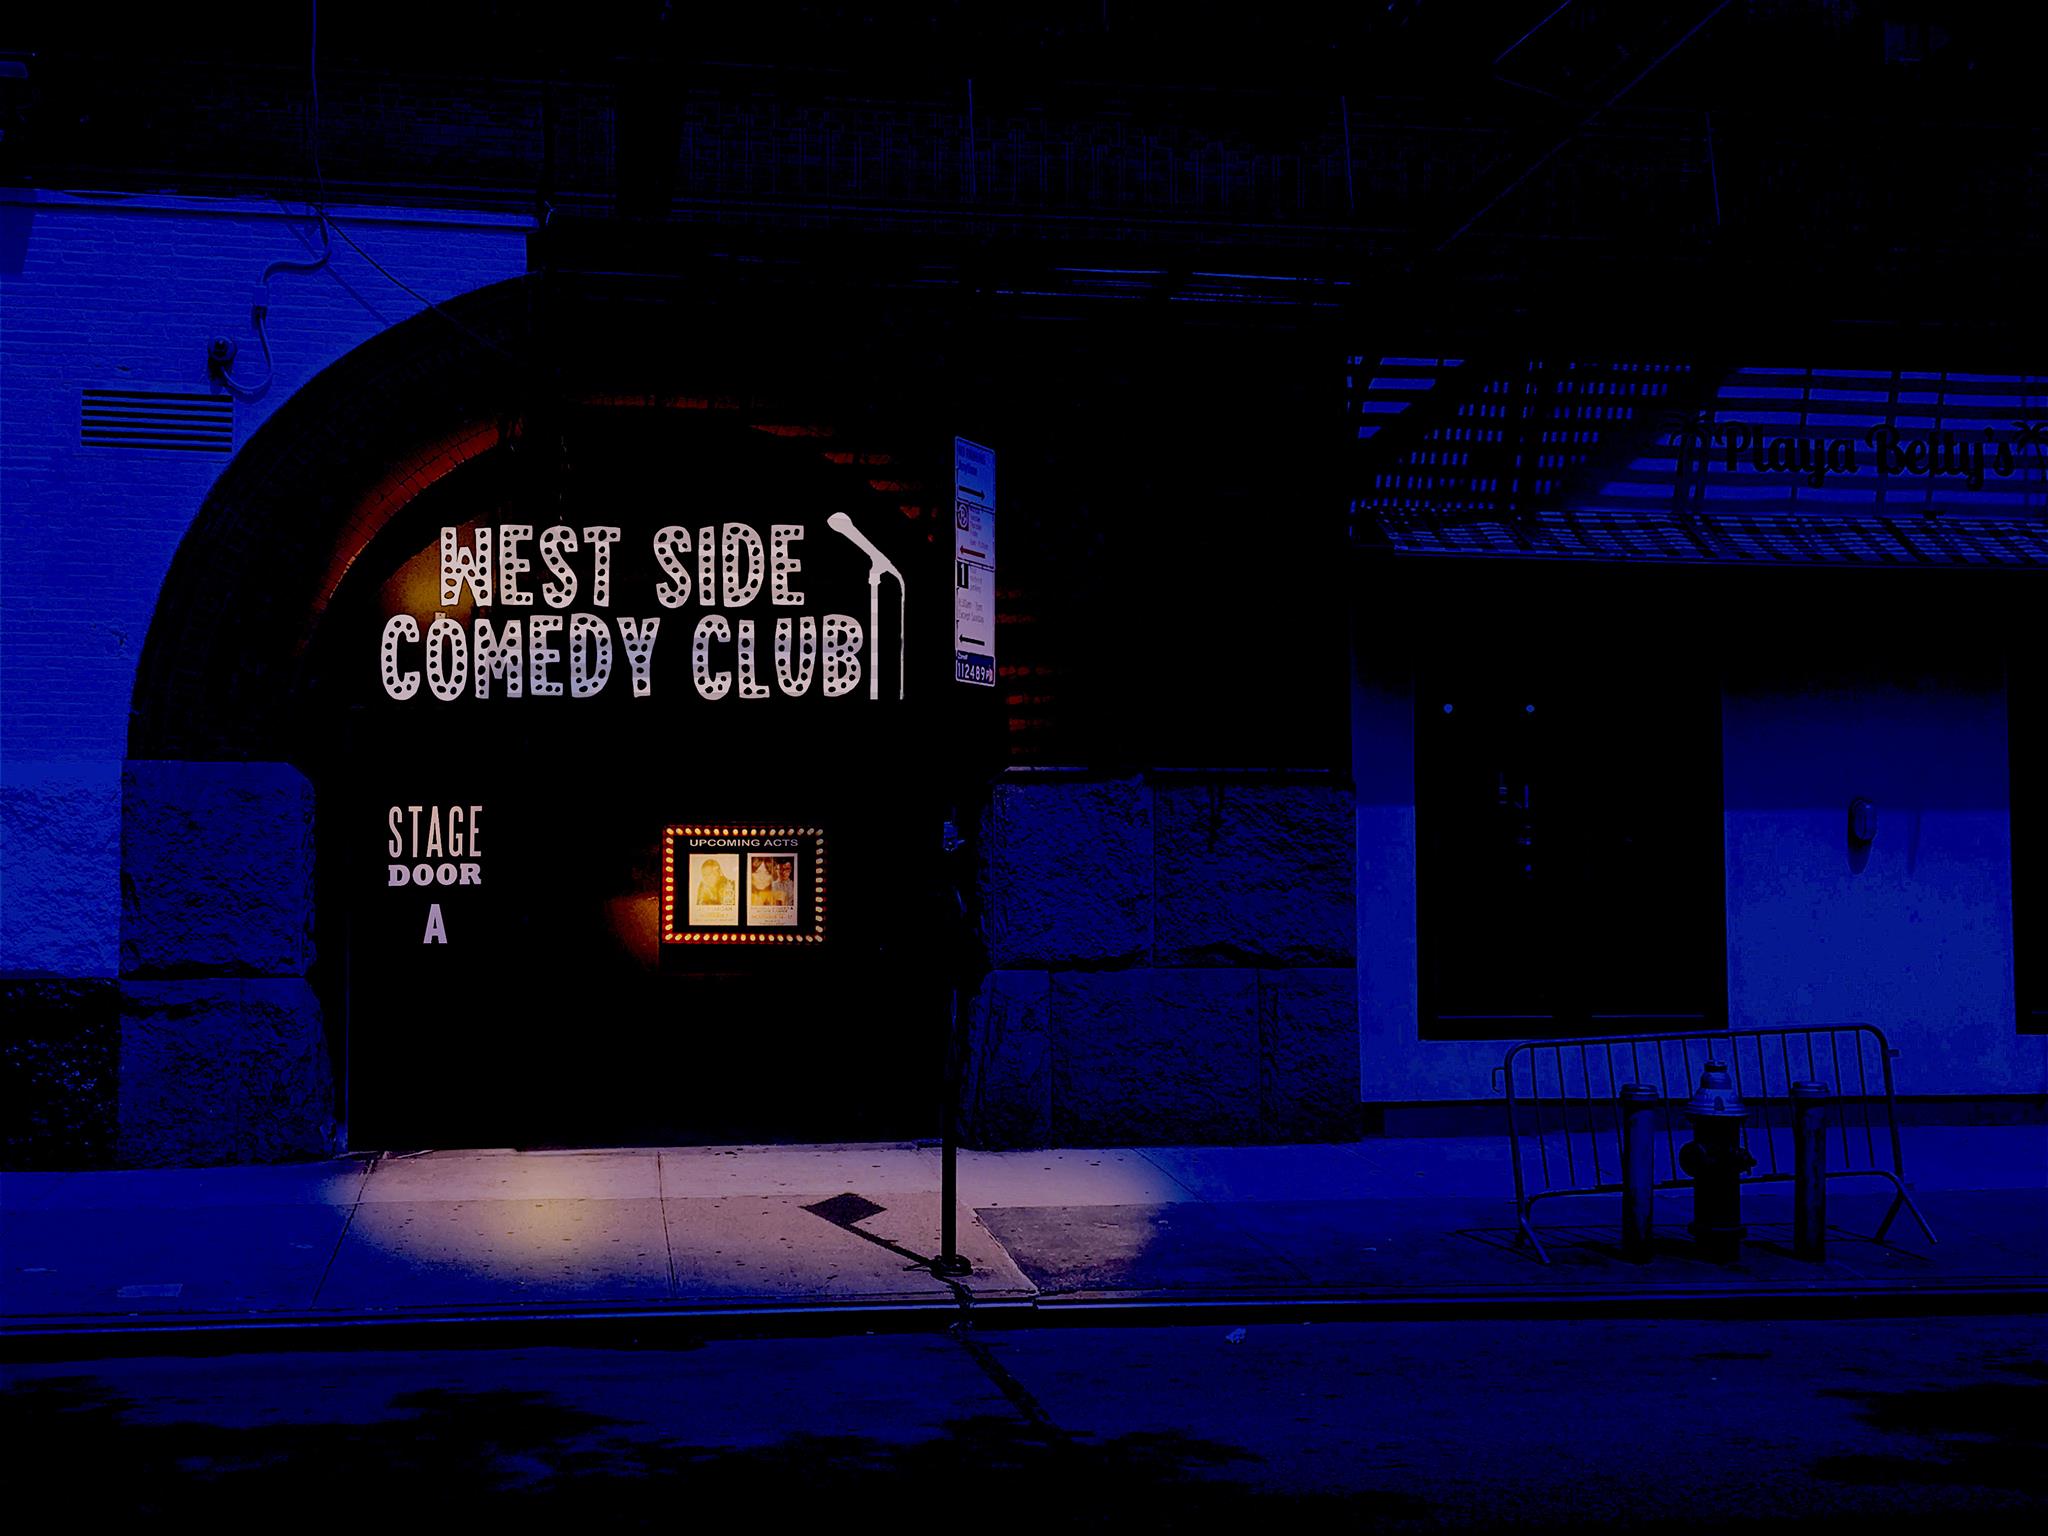 The Shh** Show Presents a Night of Standup Comedy at West Side Comedy Club!